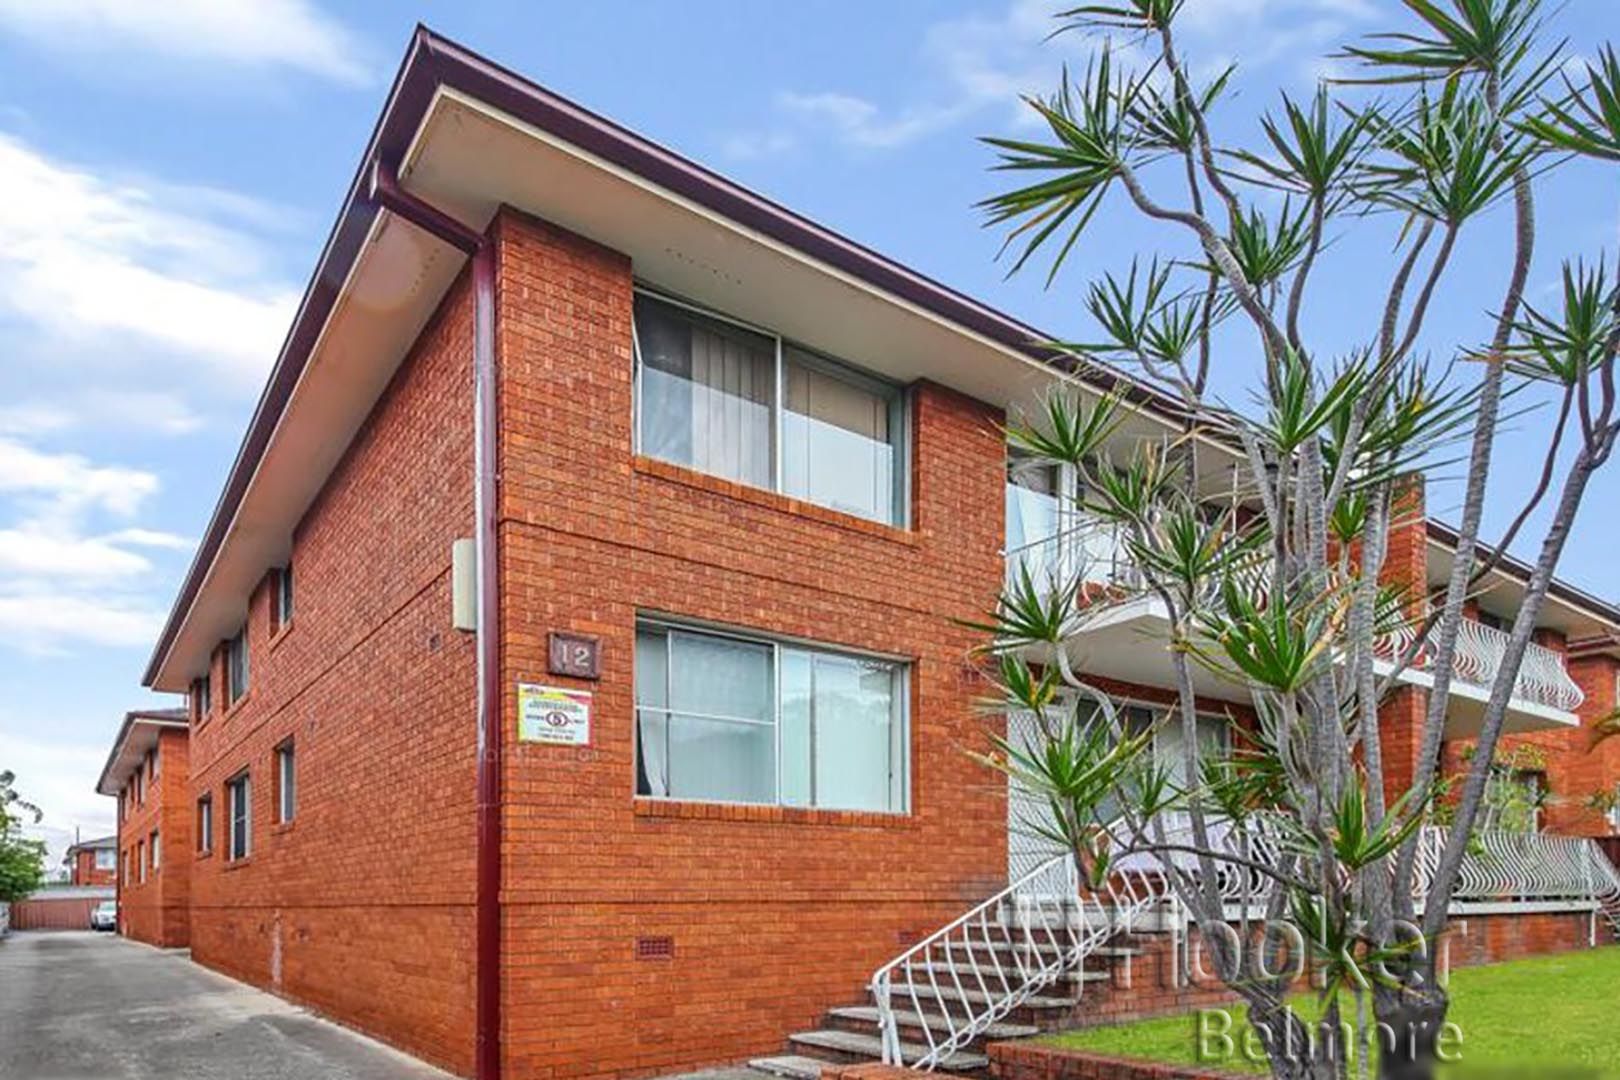 2 bedrooms Apartment / Unit / Flat in 1/12 Drummond St BELMORE NSW, 2192